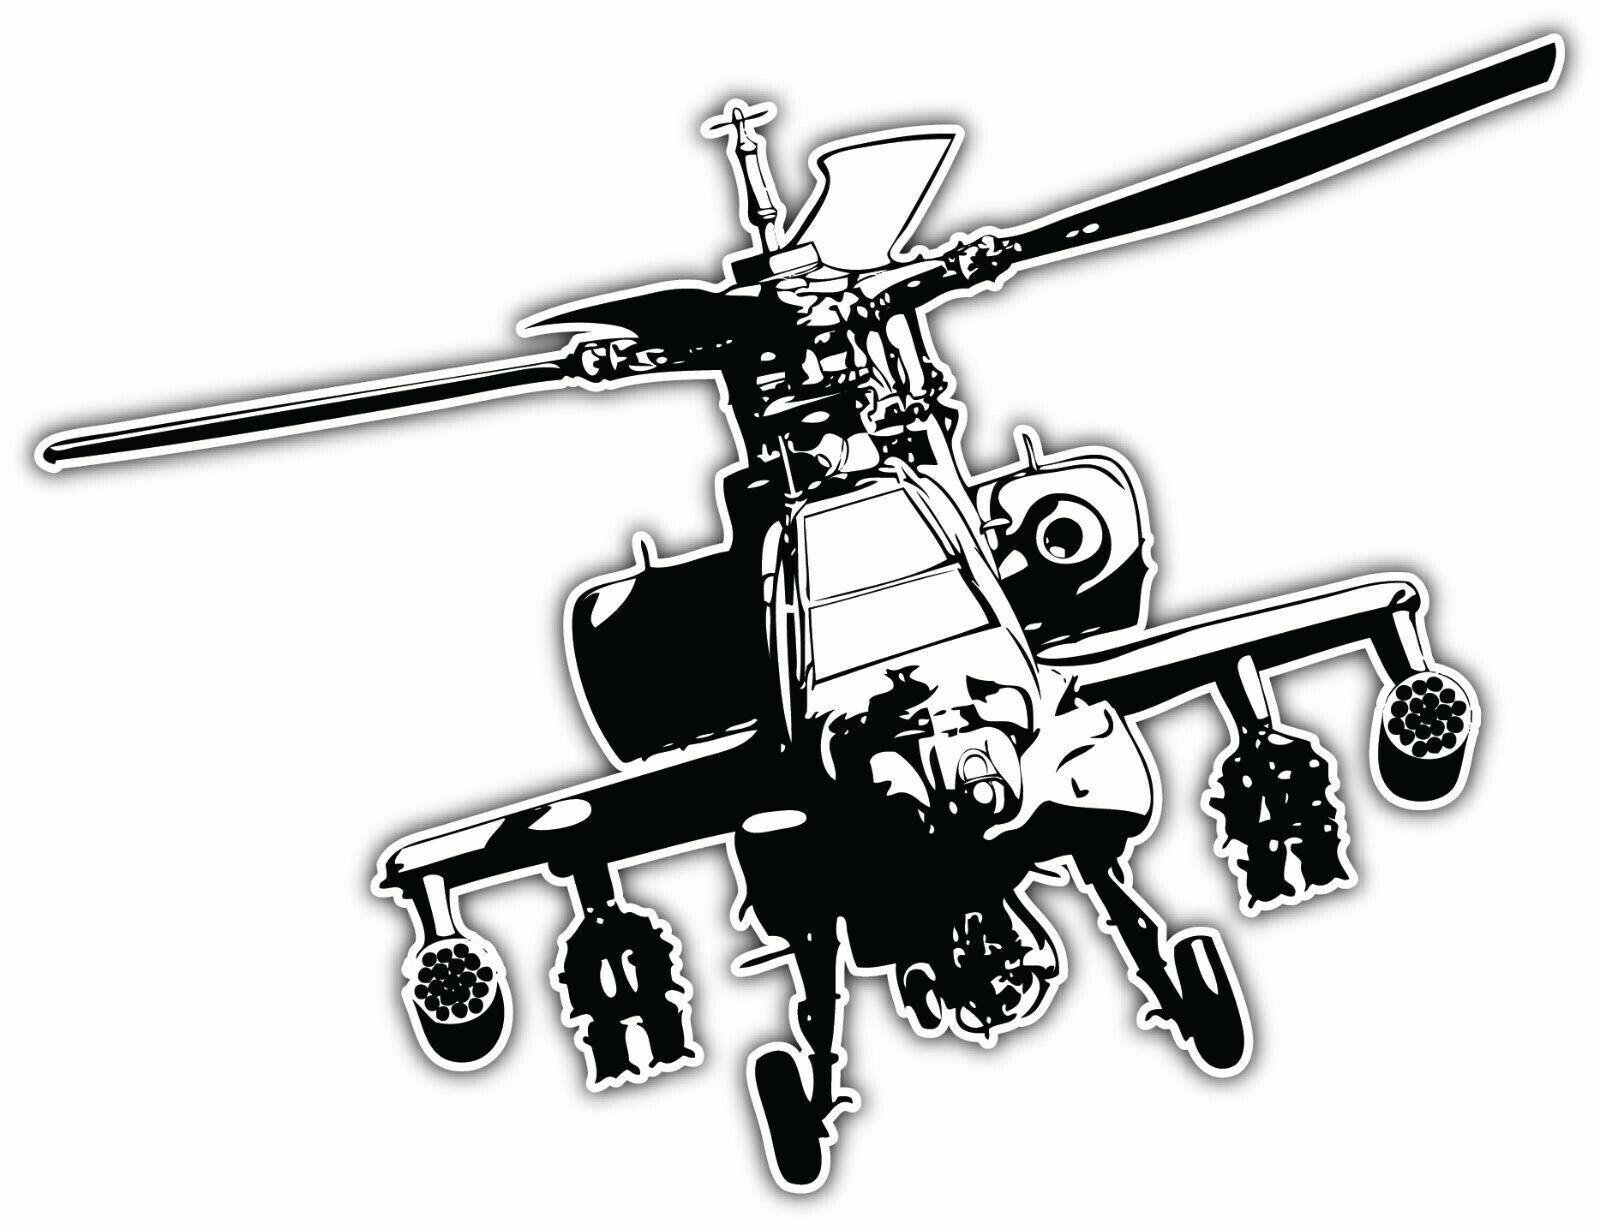 Boeing AH-64 Apache Helicopter US Army Car Bumper Window Sticker Decal 5\